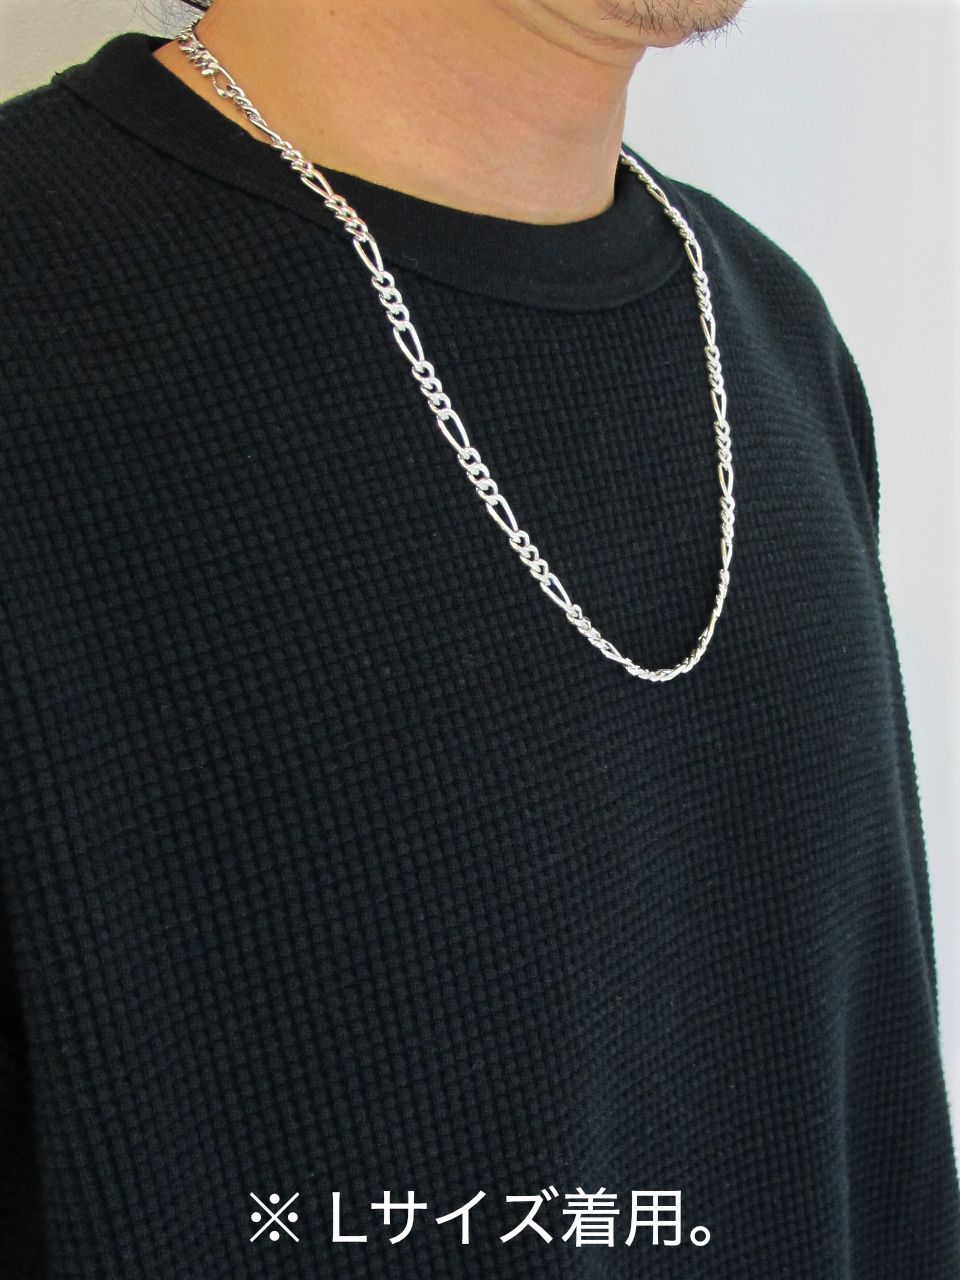 FIGARO WIDE CHAIN (SILVER) / フィガロワイドチェーンネックレス - L